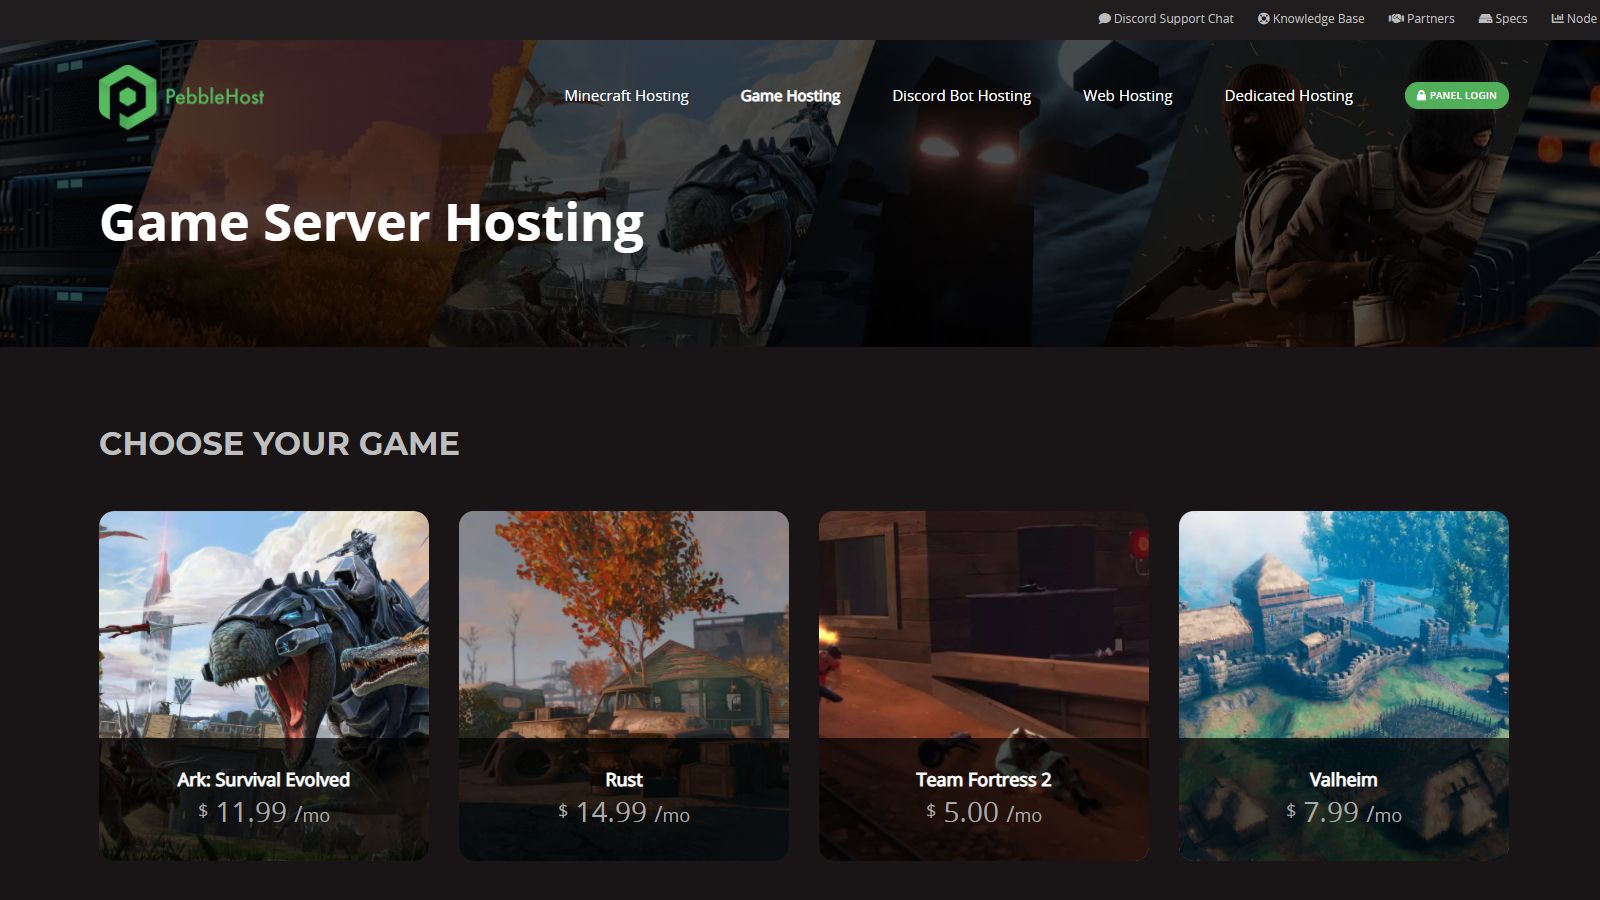 Screenshot of PebbleHost's &quot;Game Hosting&quot; page